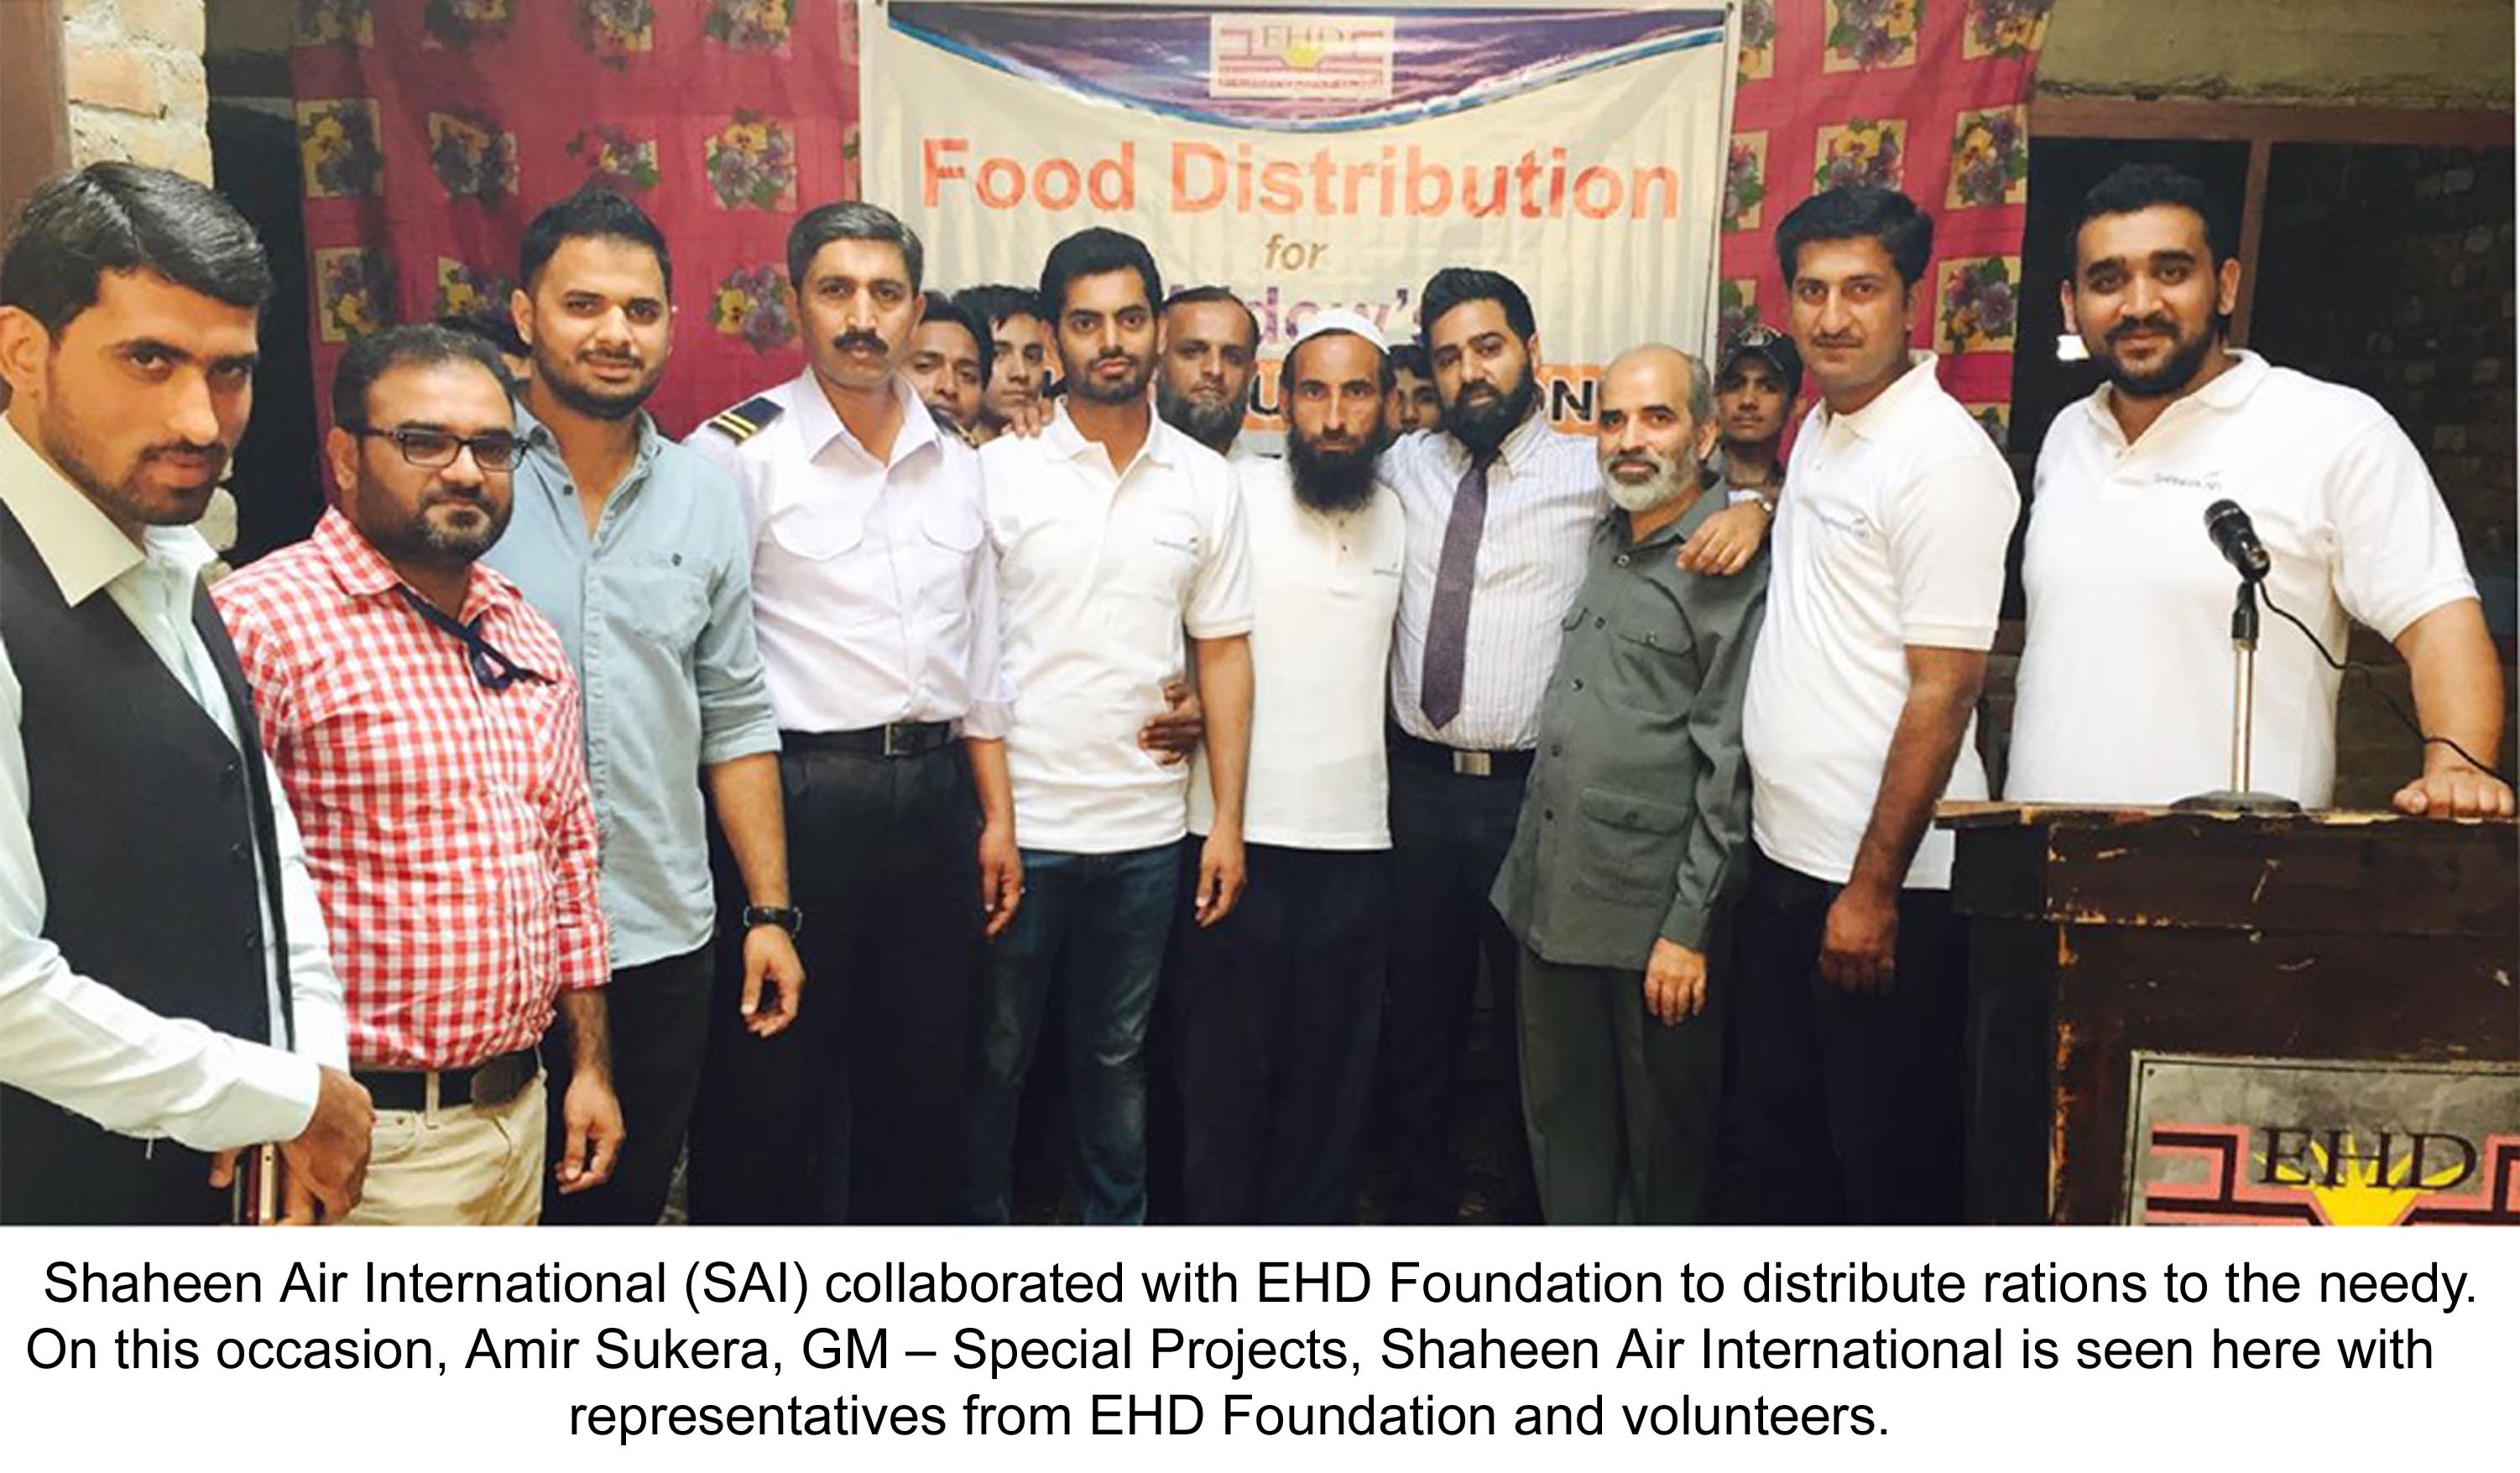 shaheen-air-international-sai-collaborated-with-ehd-foundation